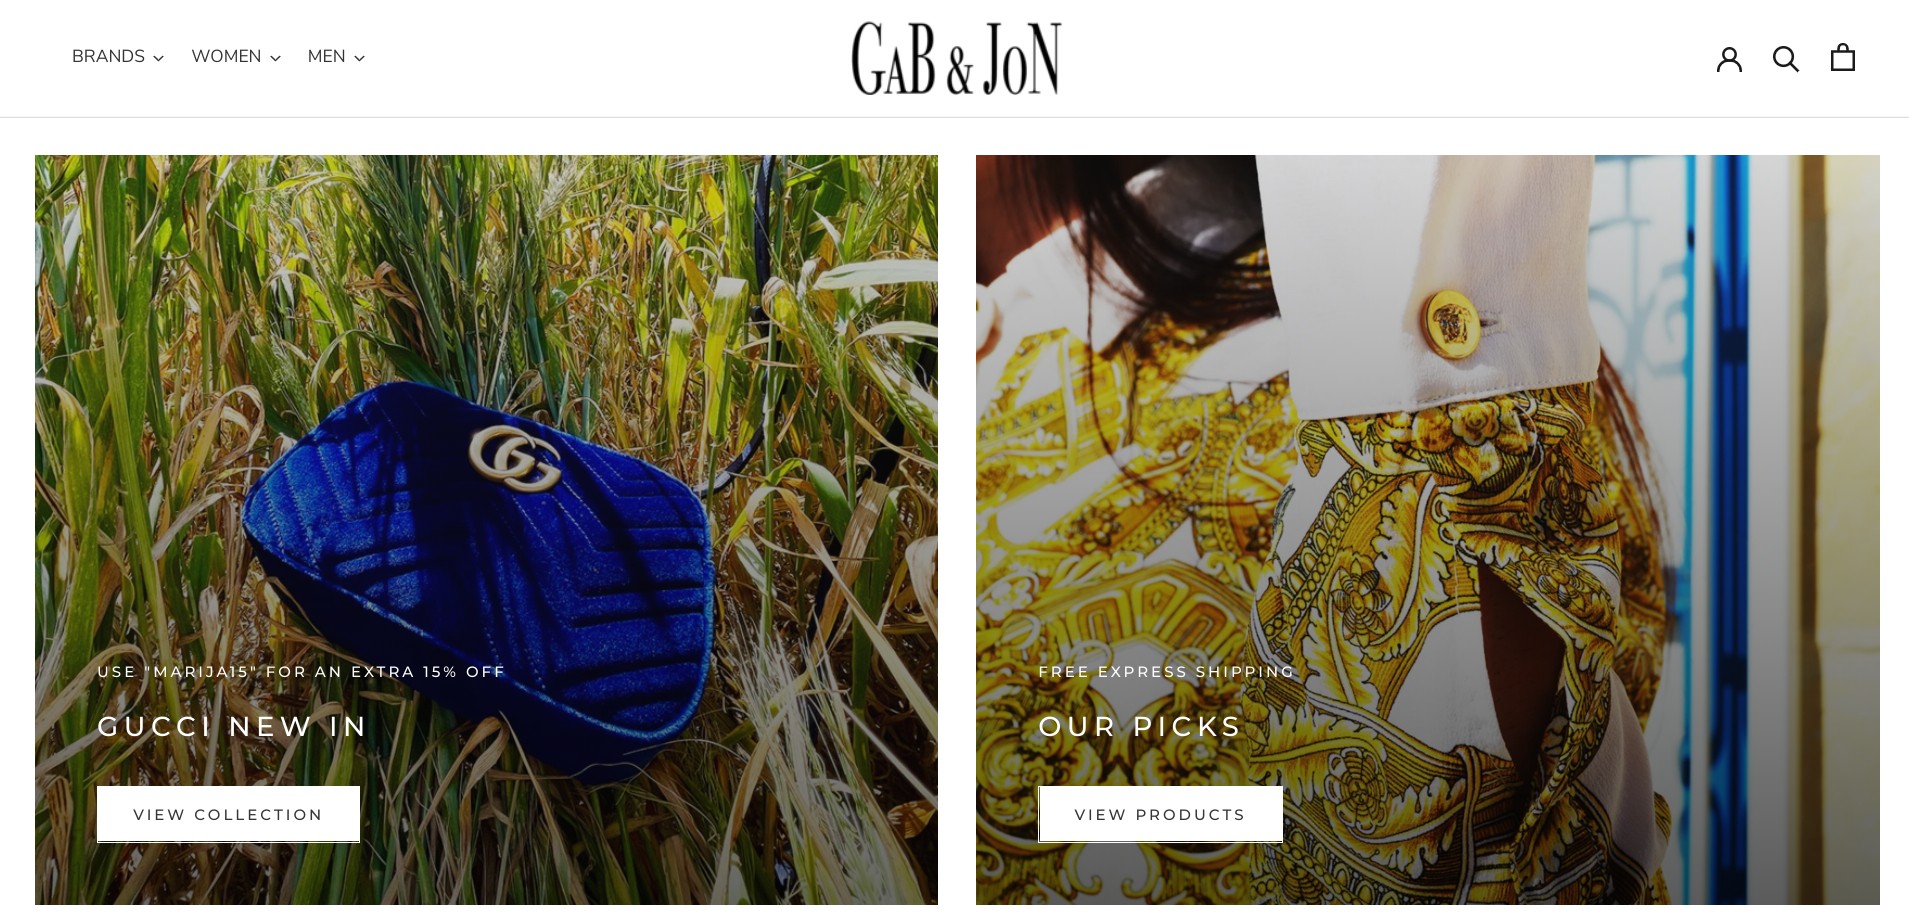 Screenshot of gabandjohn.com, a fake webshop offering products of many luxury brands like Gucci and Dior